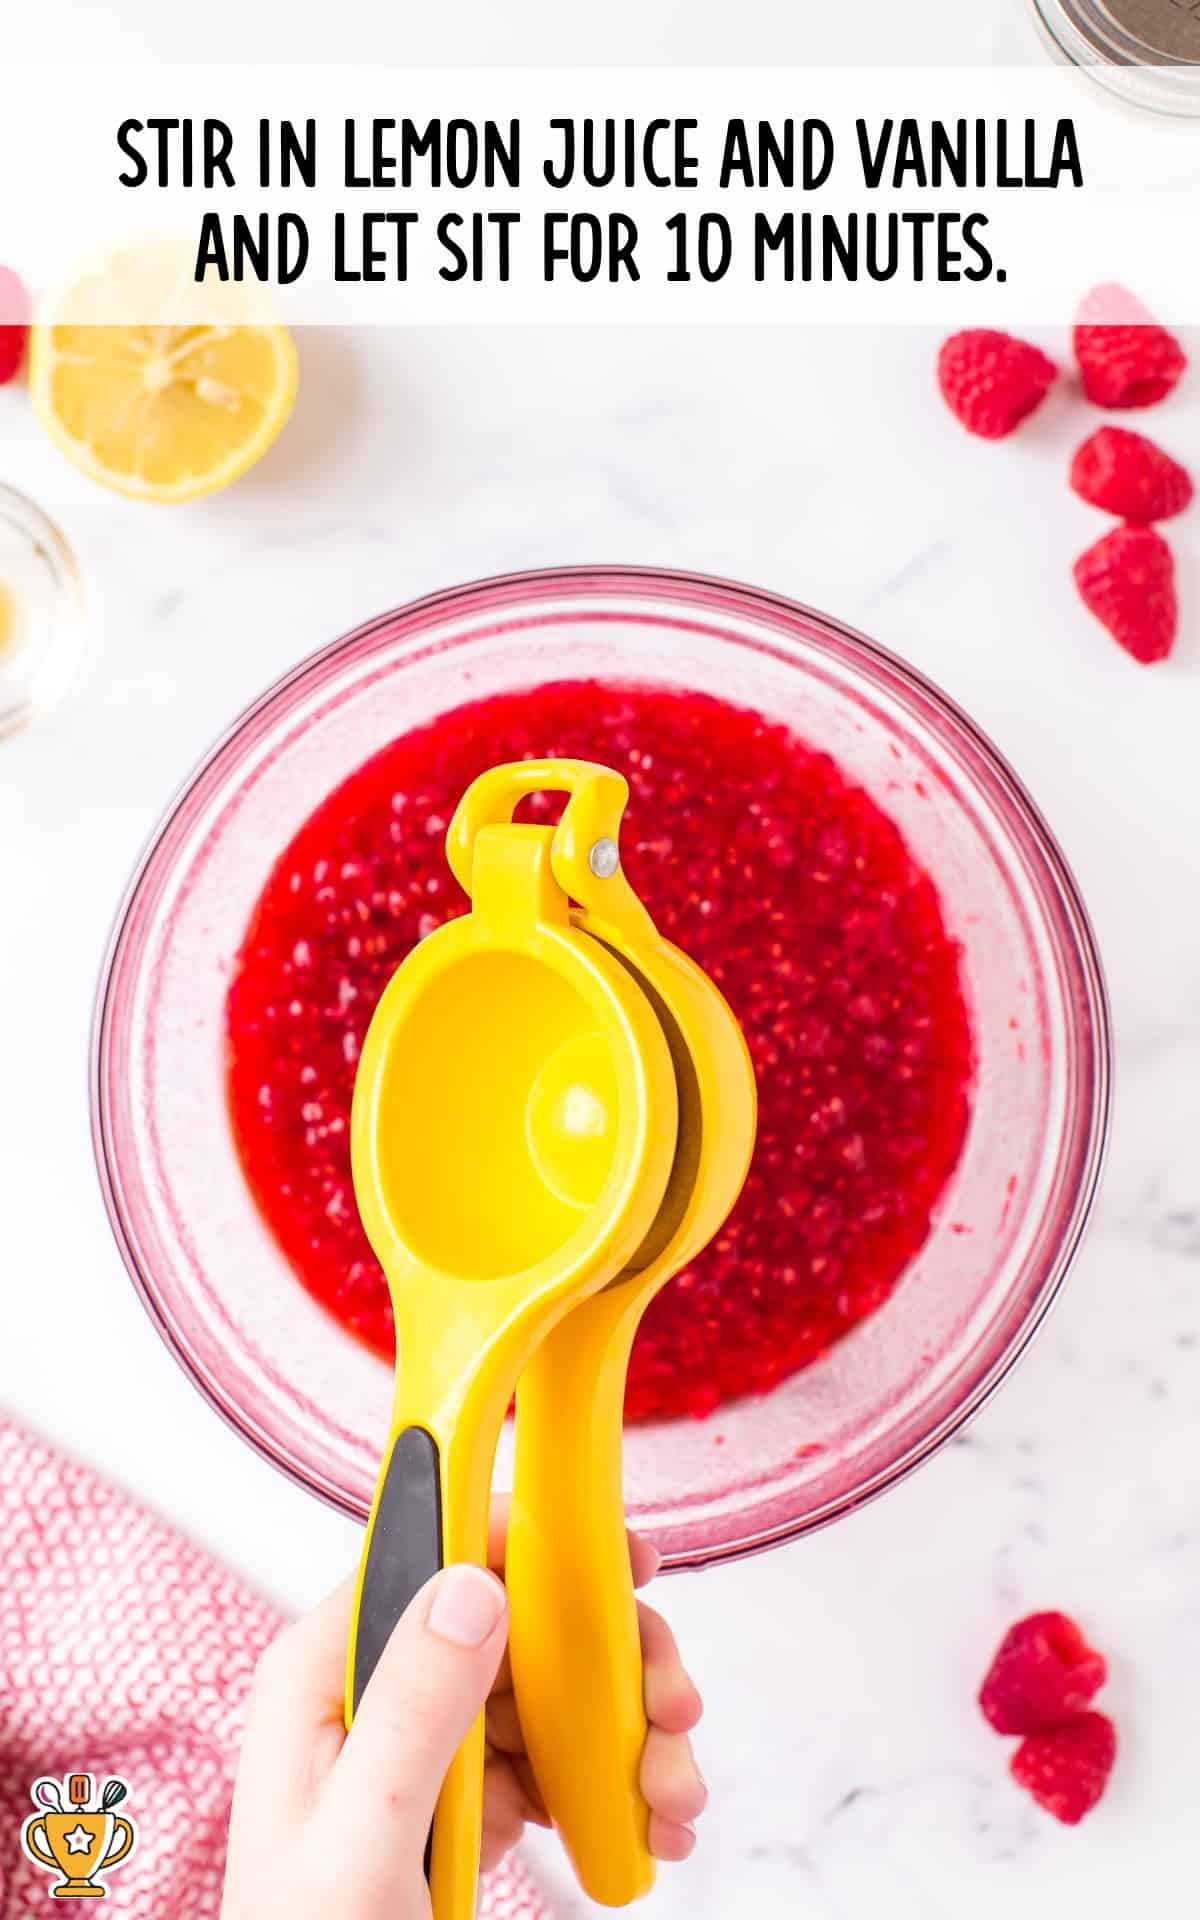 lemon juice and vanilla added to the bowl of raspberry mixture